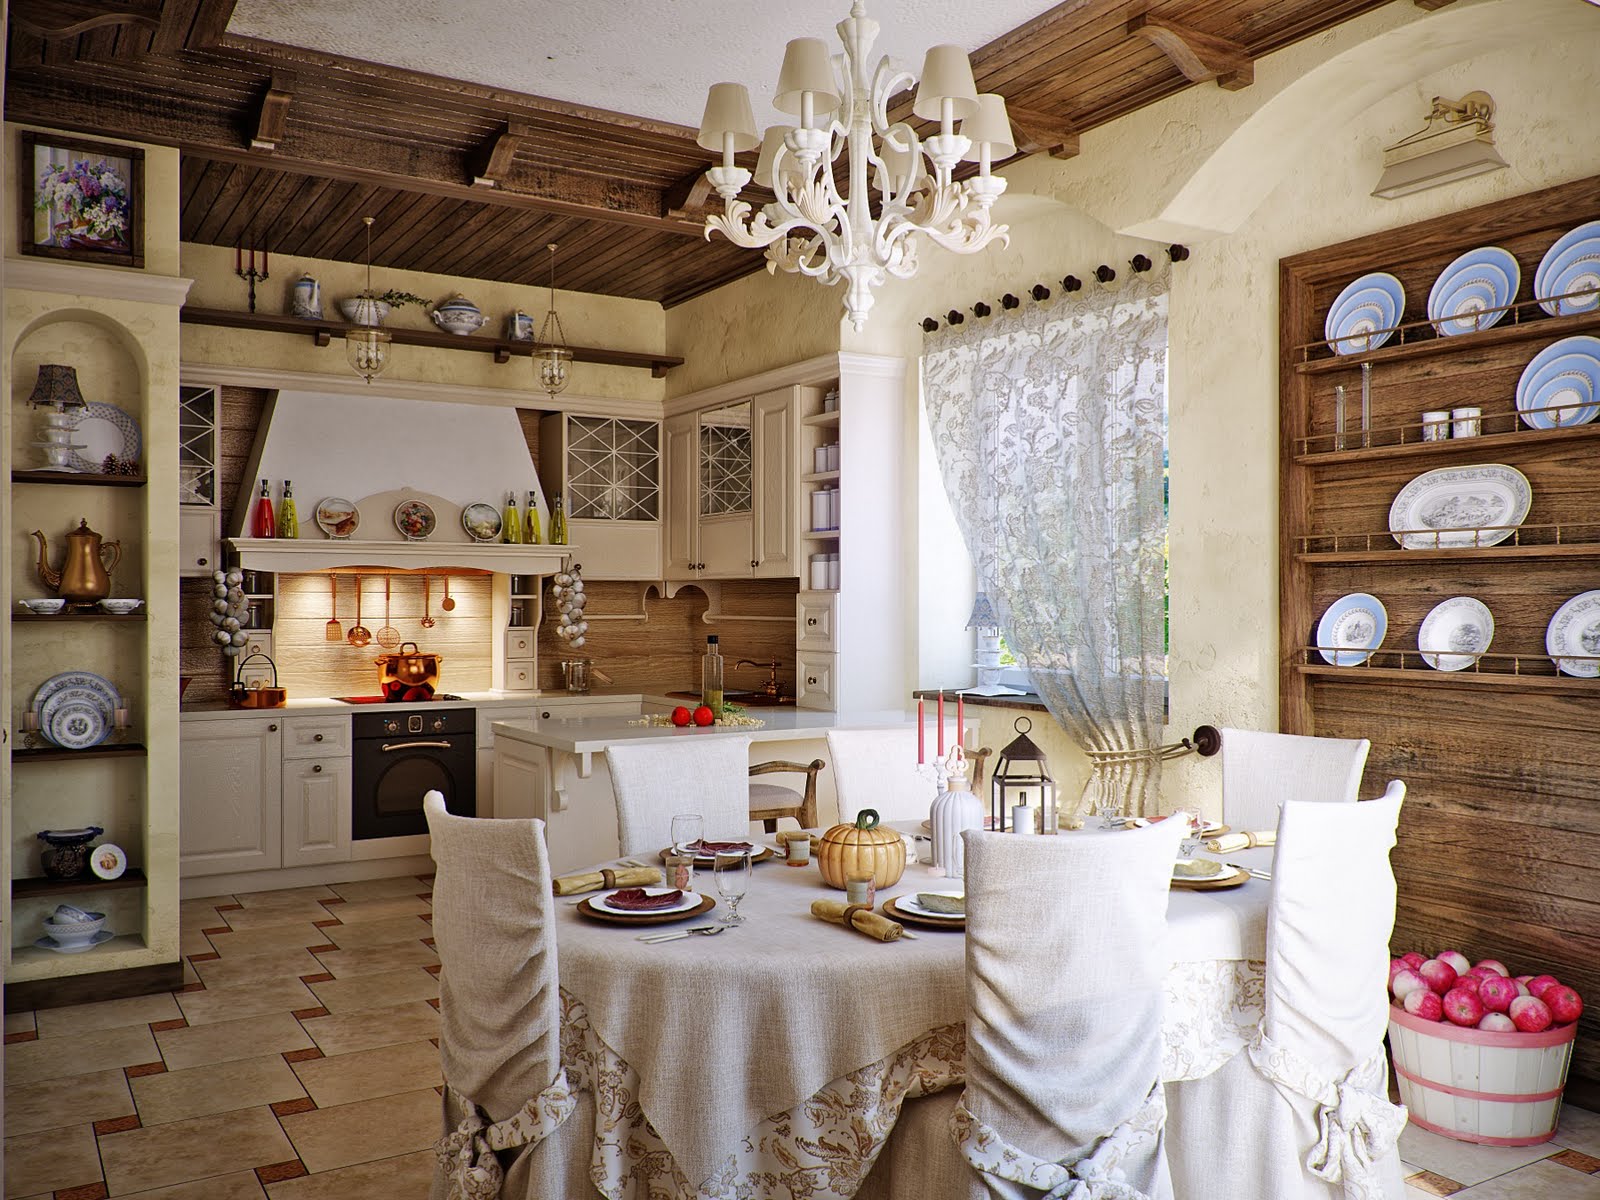 Attractive Country Kitchen Designs Ideas That Inspire You